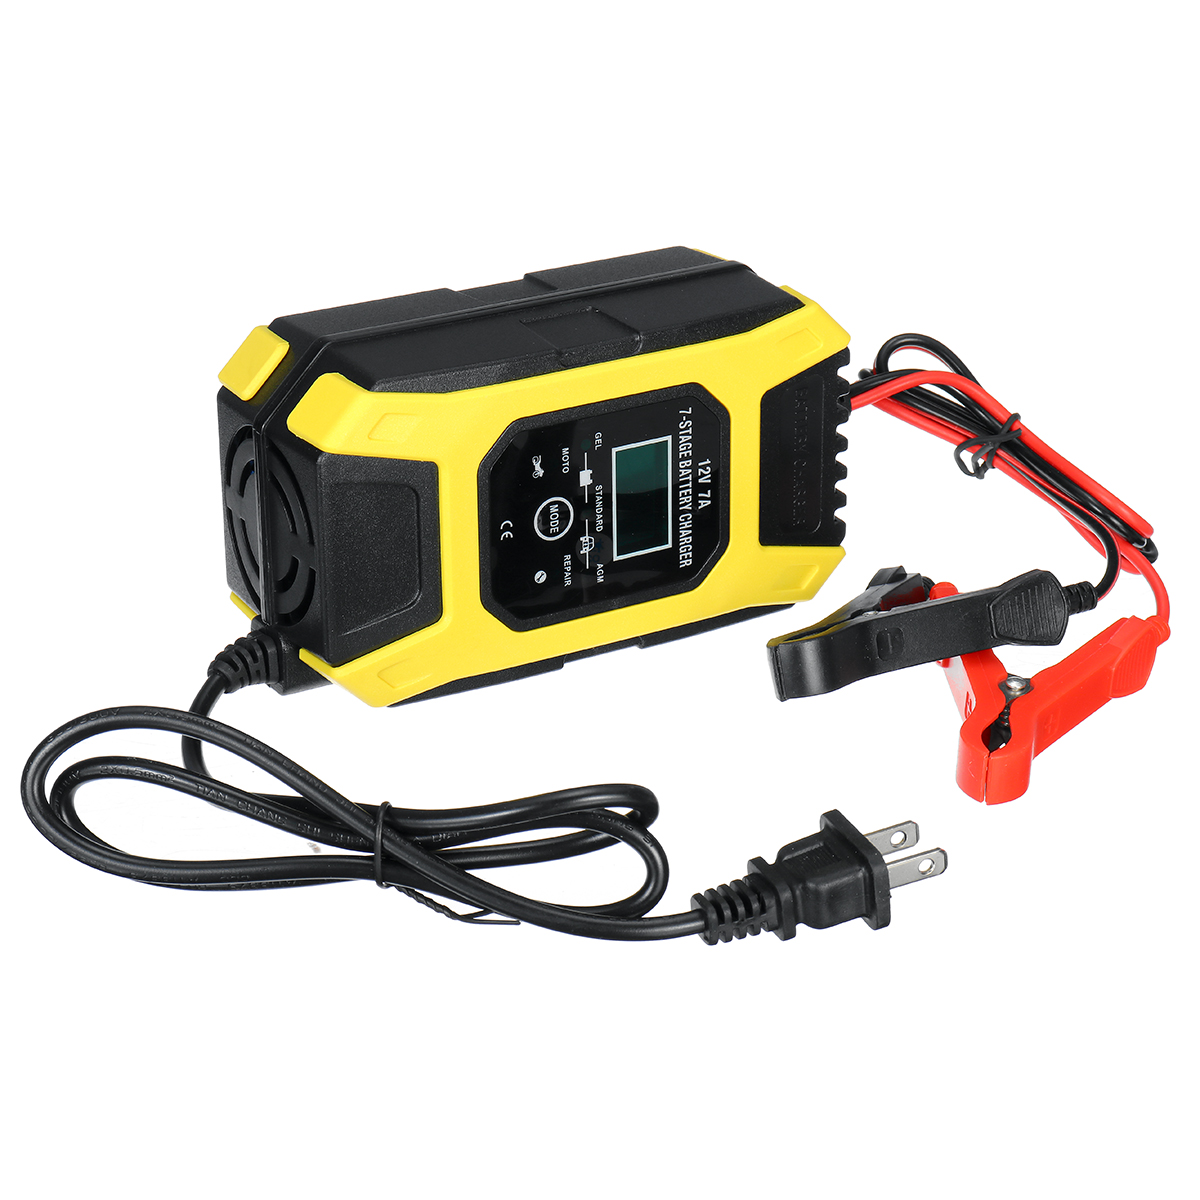 12V 7A LCD Pulse Repair Battery Charger for Car Motorcycle AGM Gel Wet Lead Acid